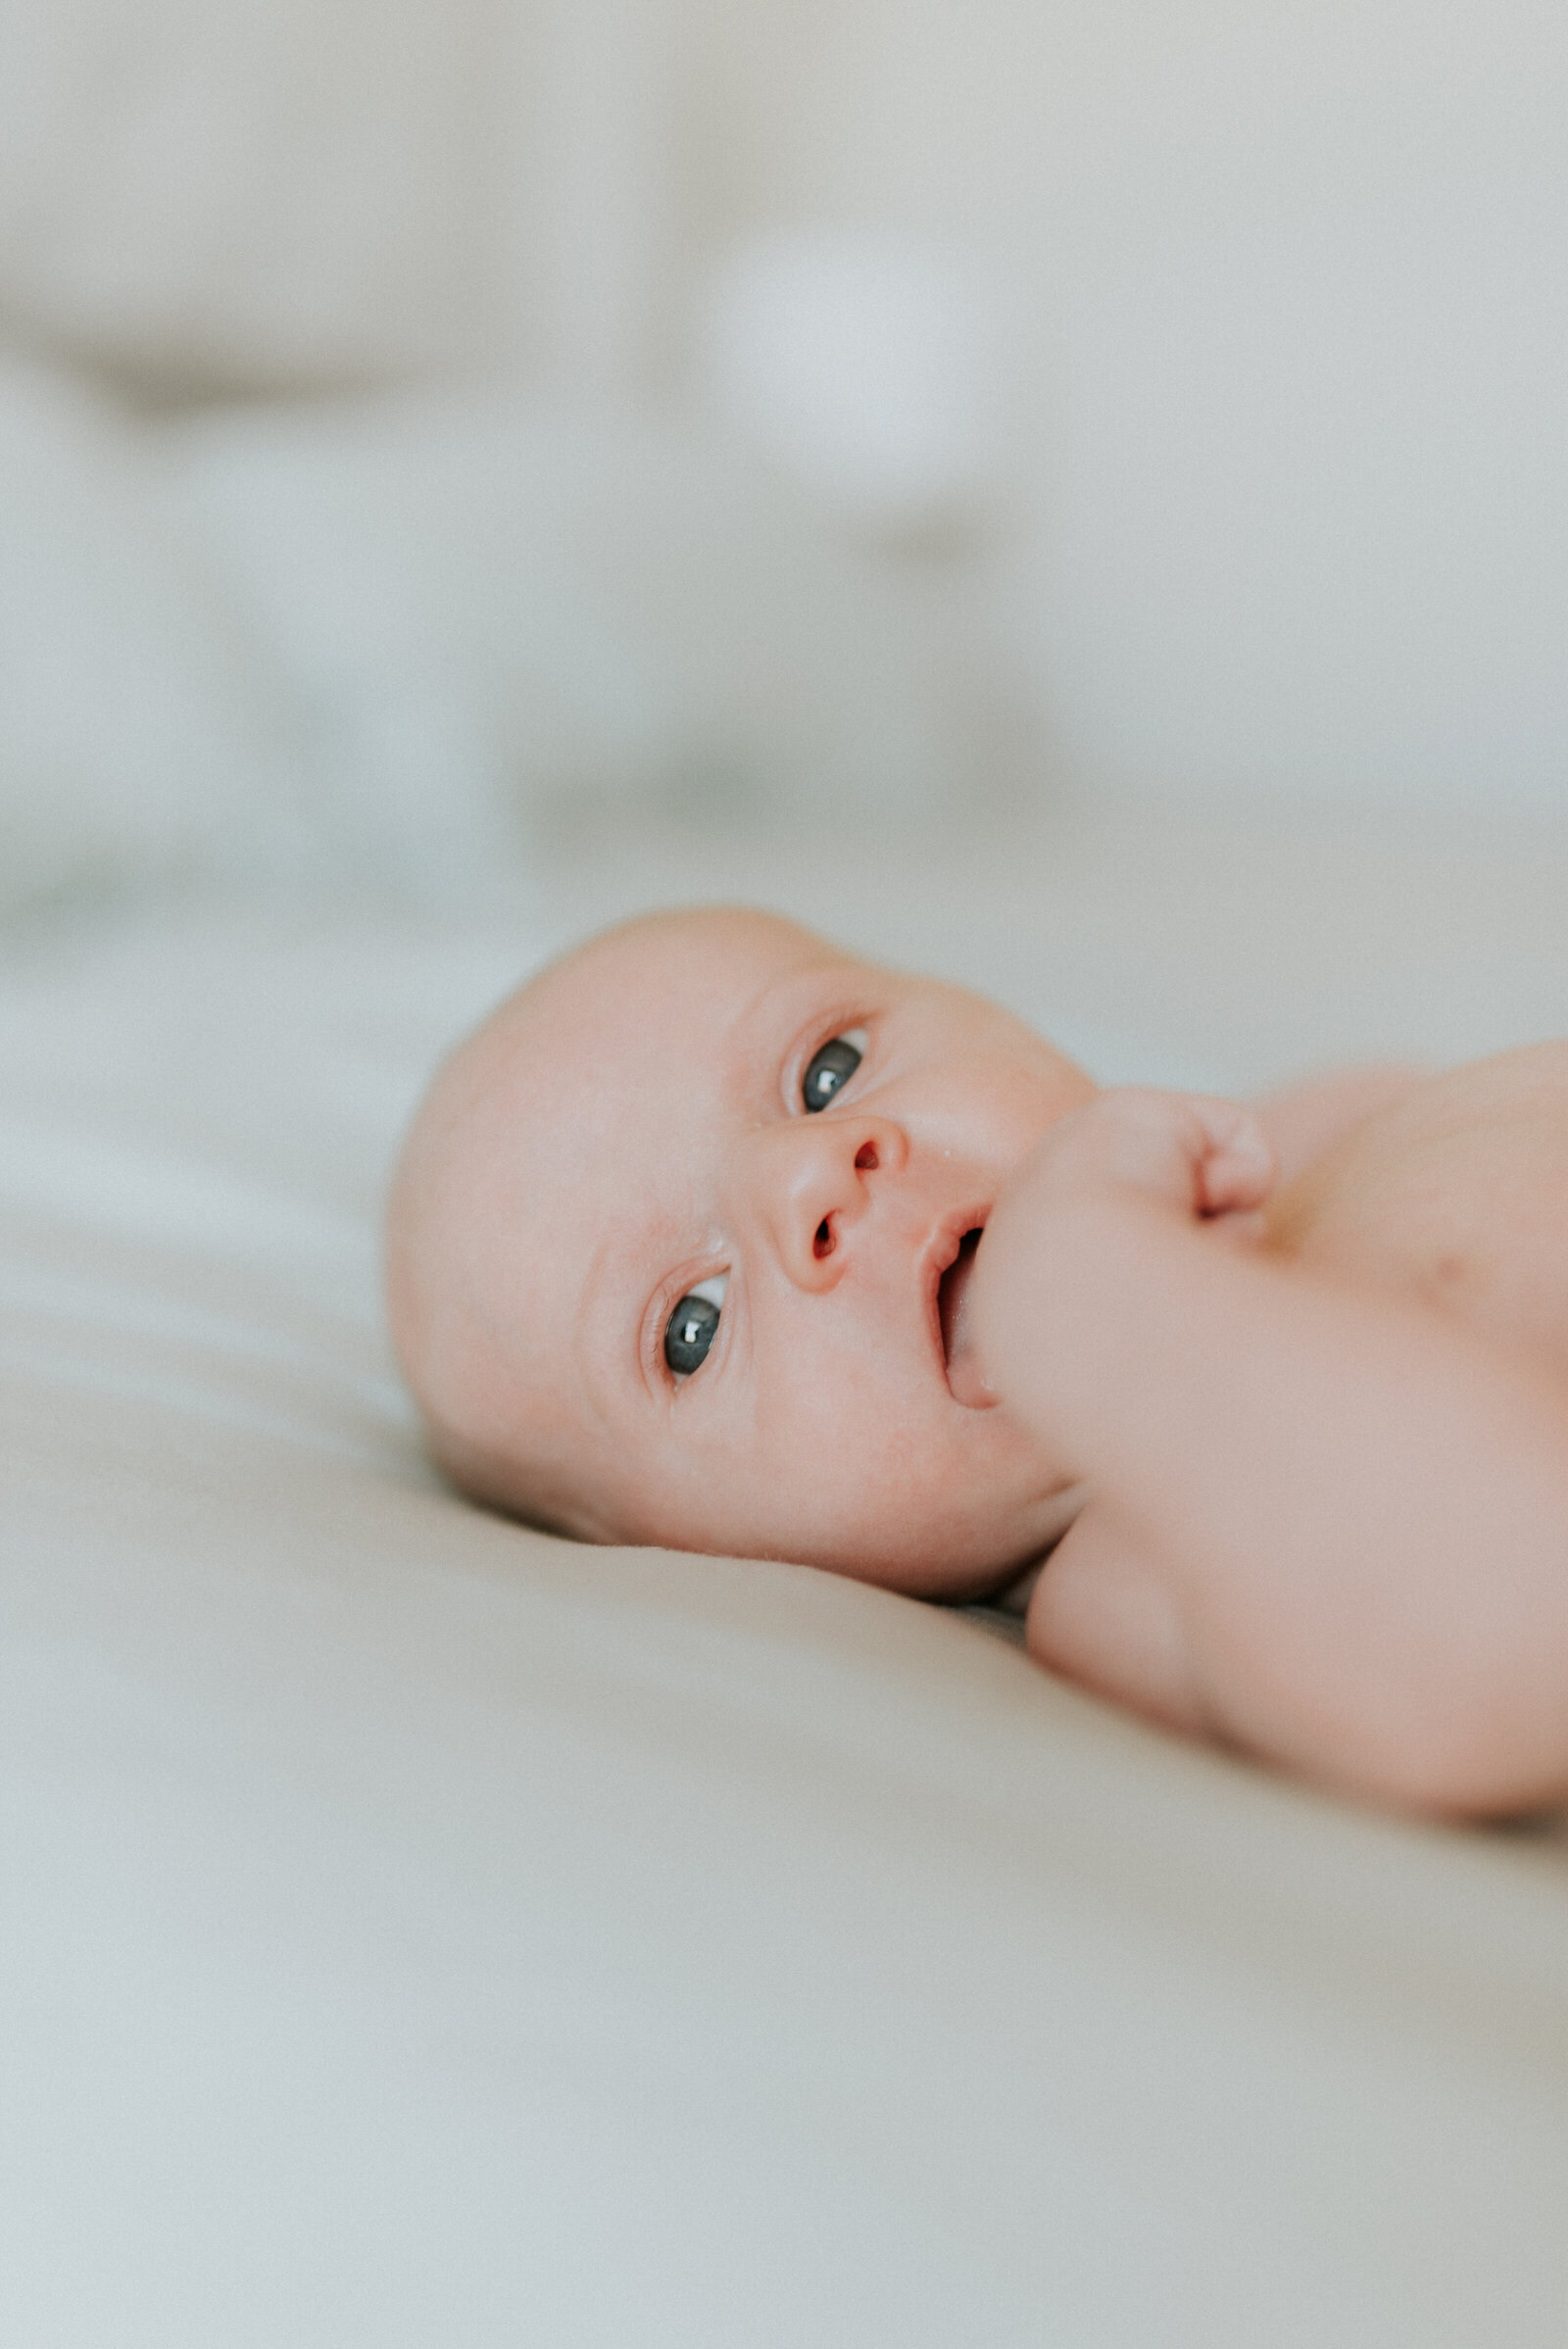 Embrace love in the Twin Cities with newborn photography by Shannon Kathleen. Cherish these early moments in your St. Paul or Minneapolis home. Schedule today.